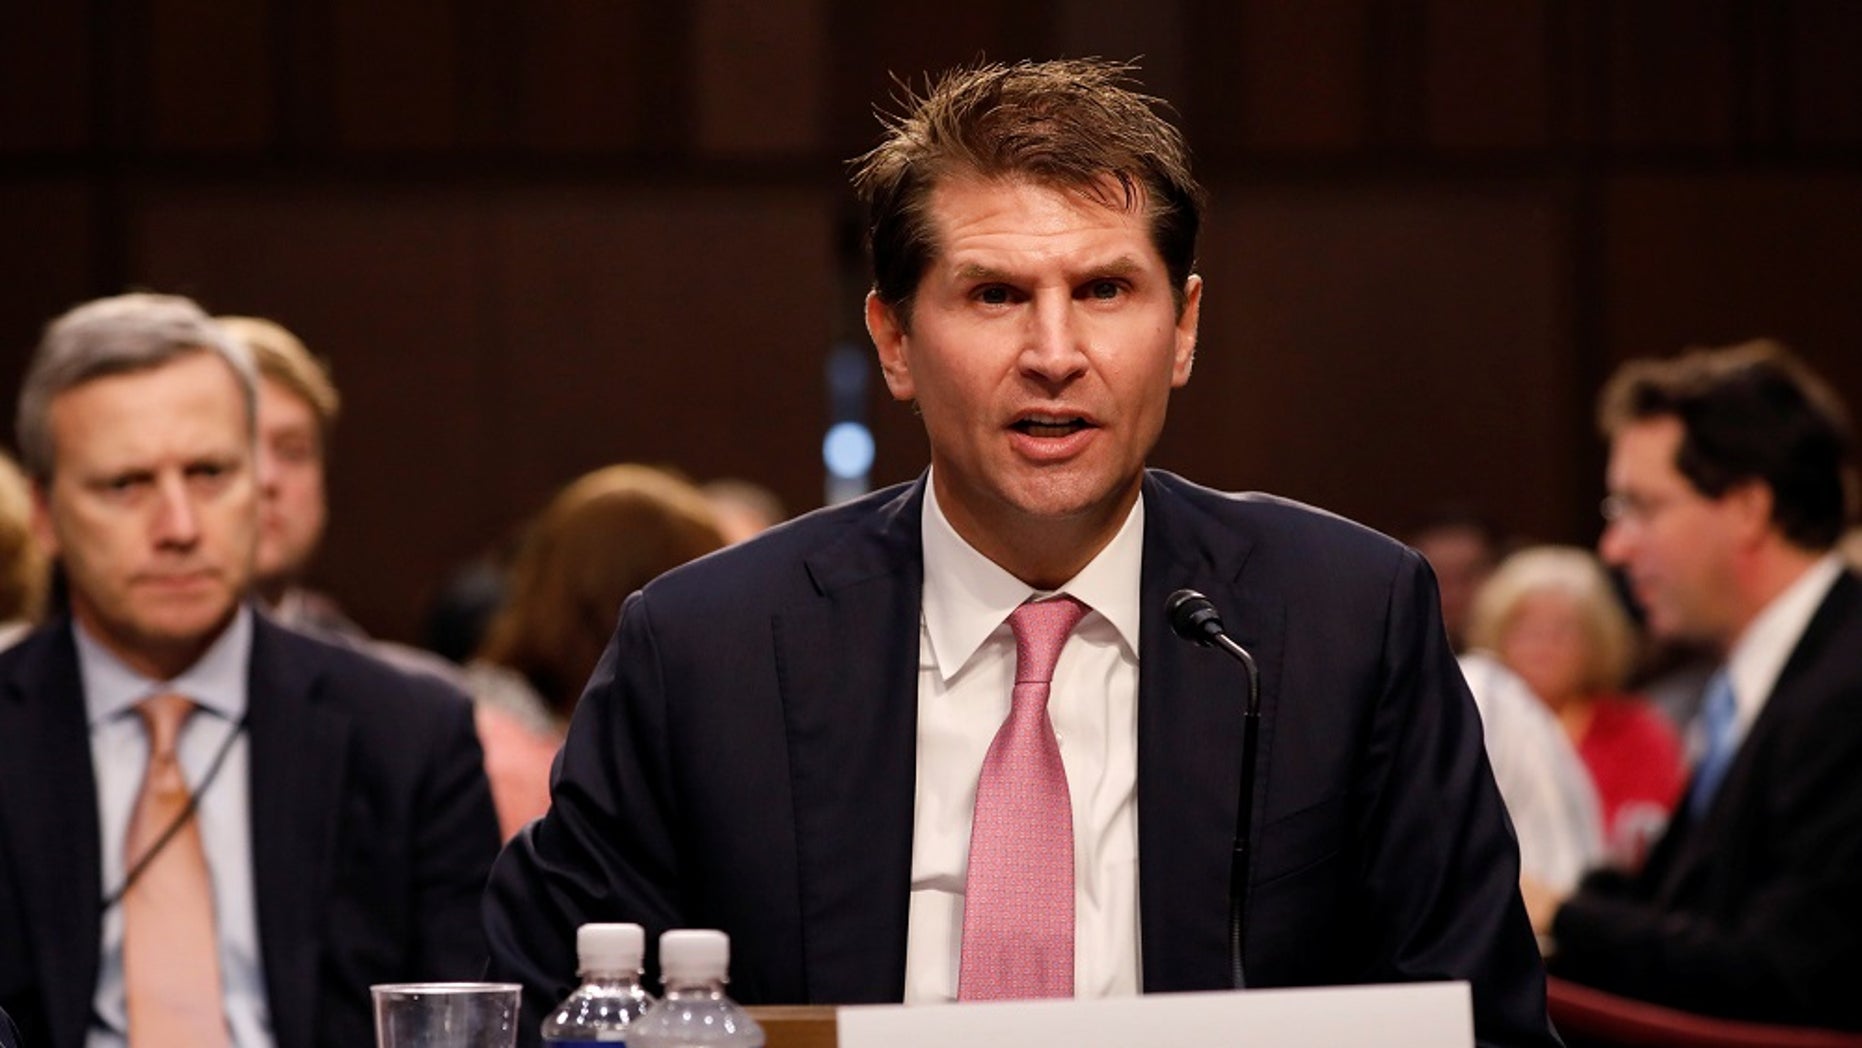 Top FBI official Bill Priestap to leave government | Fox News